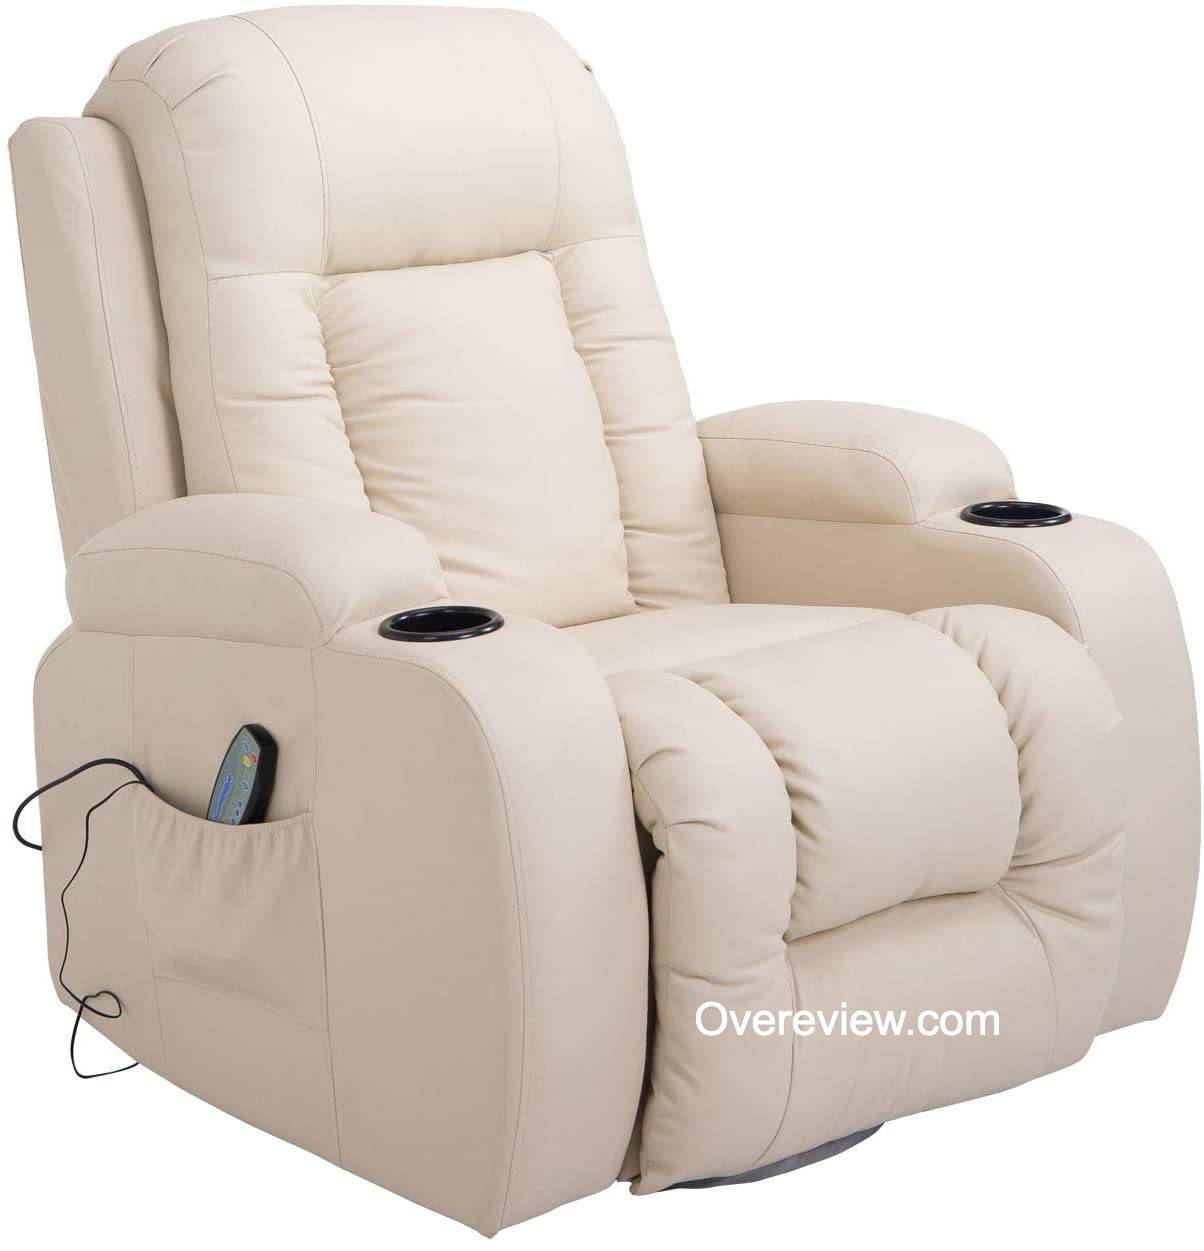 Best 15 Most Comfortable Recliners Buying Guide Reviews - 2022